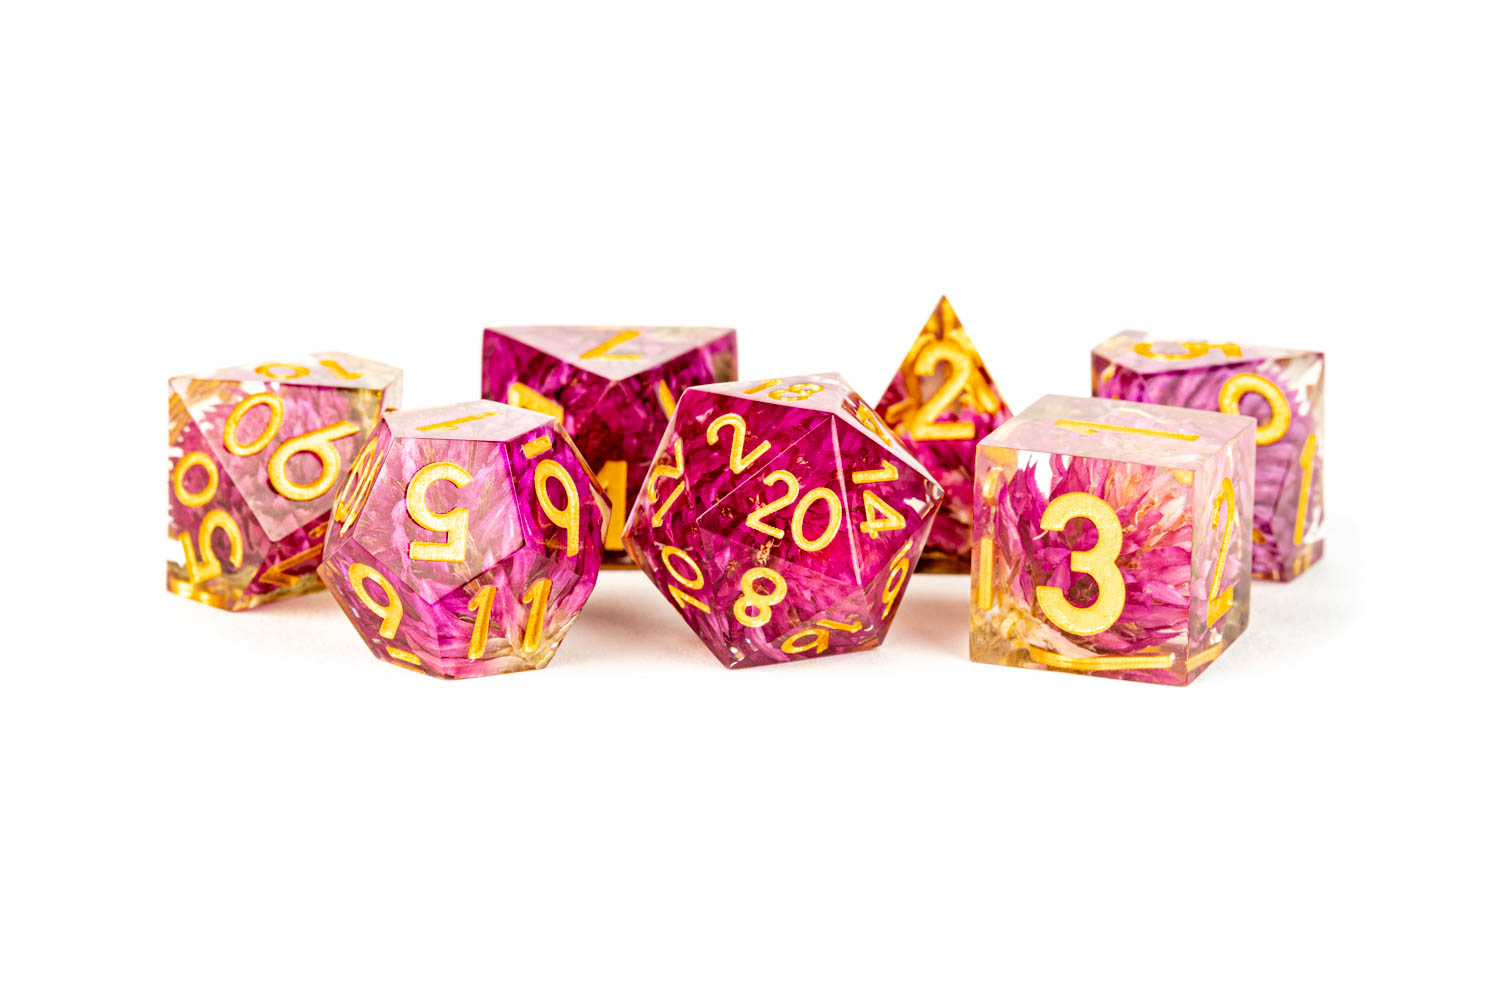 Hand Crafted Sharp Edge Dice set with pink flowers and gold numbers